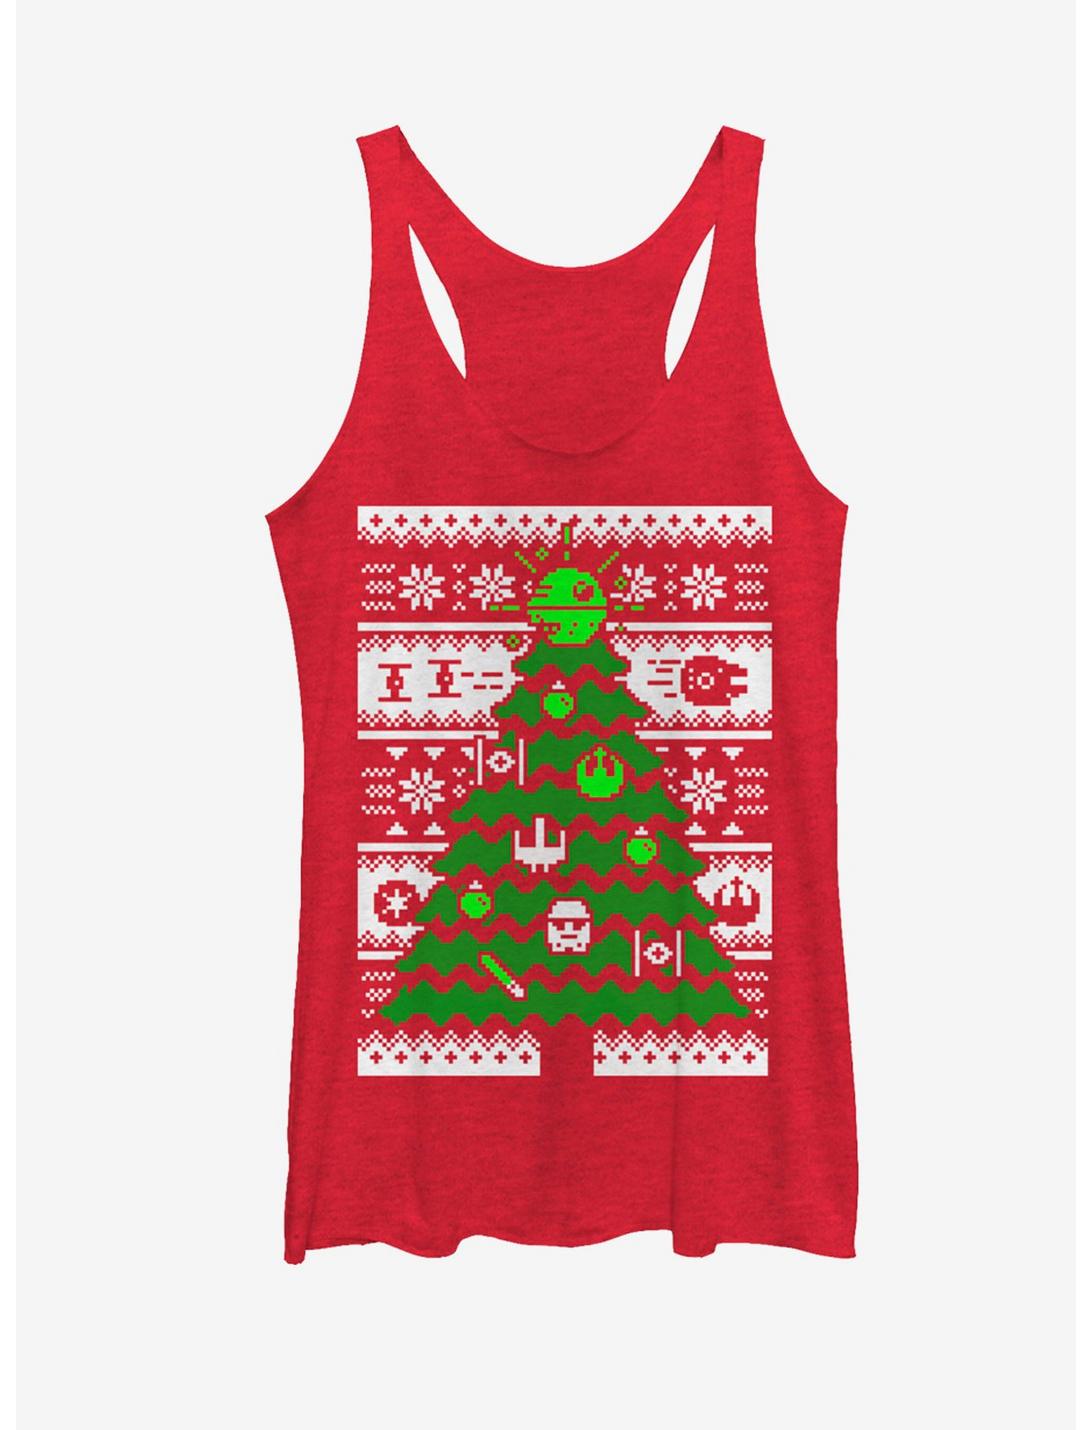 Star Wars Ugly Christmas Sweater Tree Womens Tank, RED HTR, hi-res